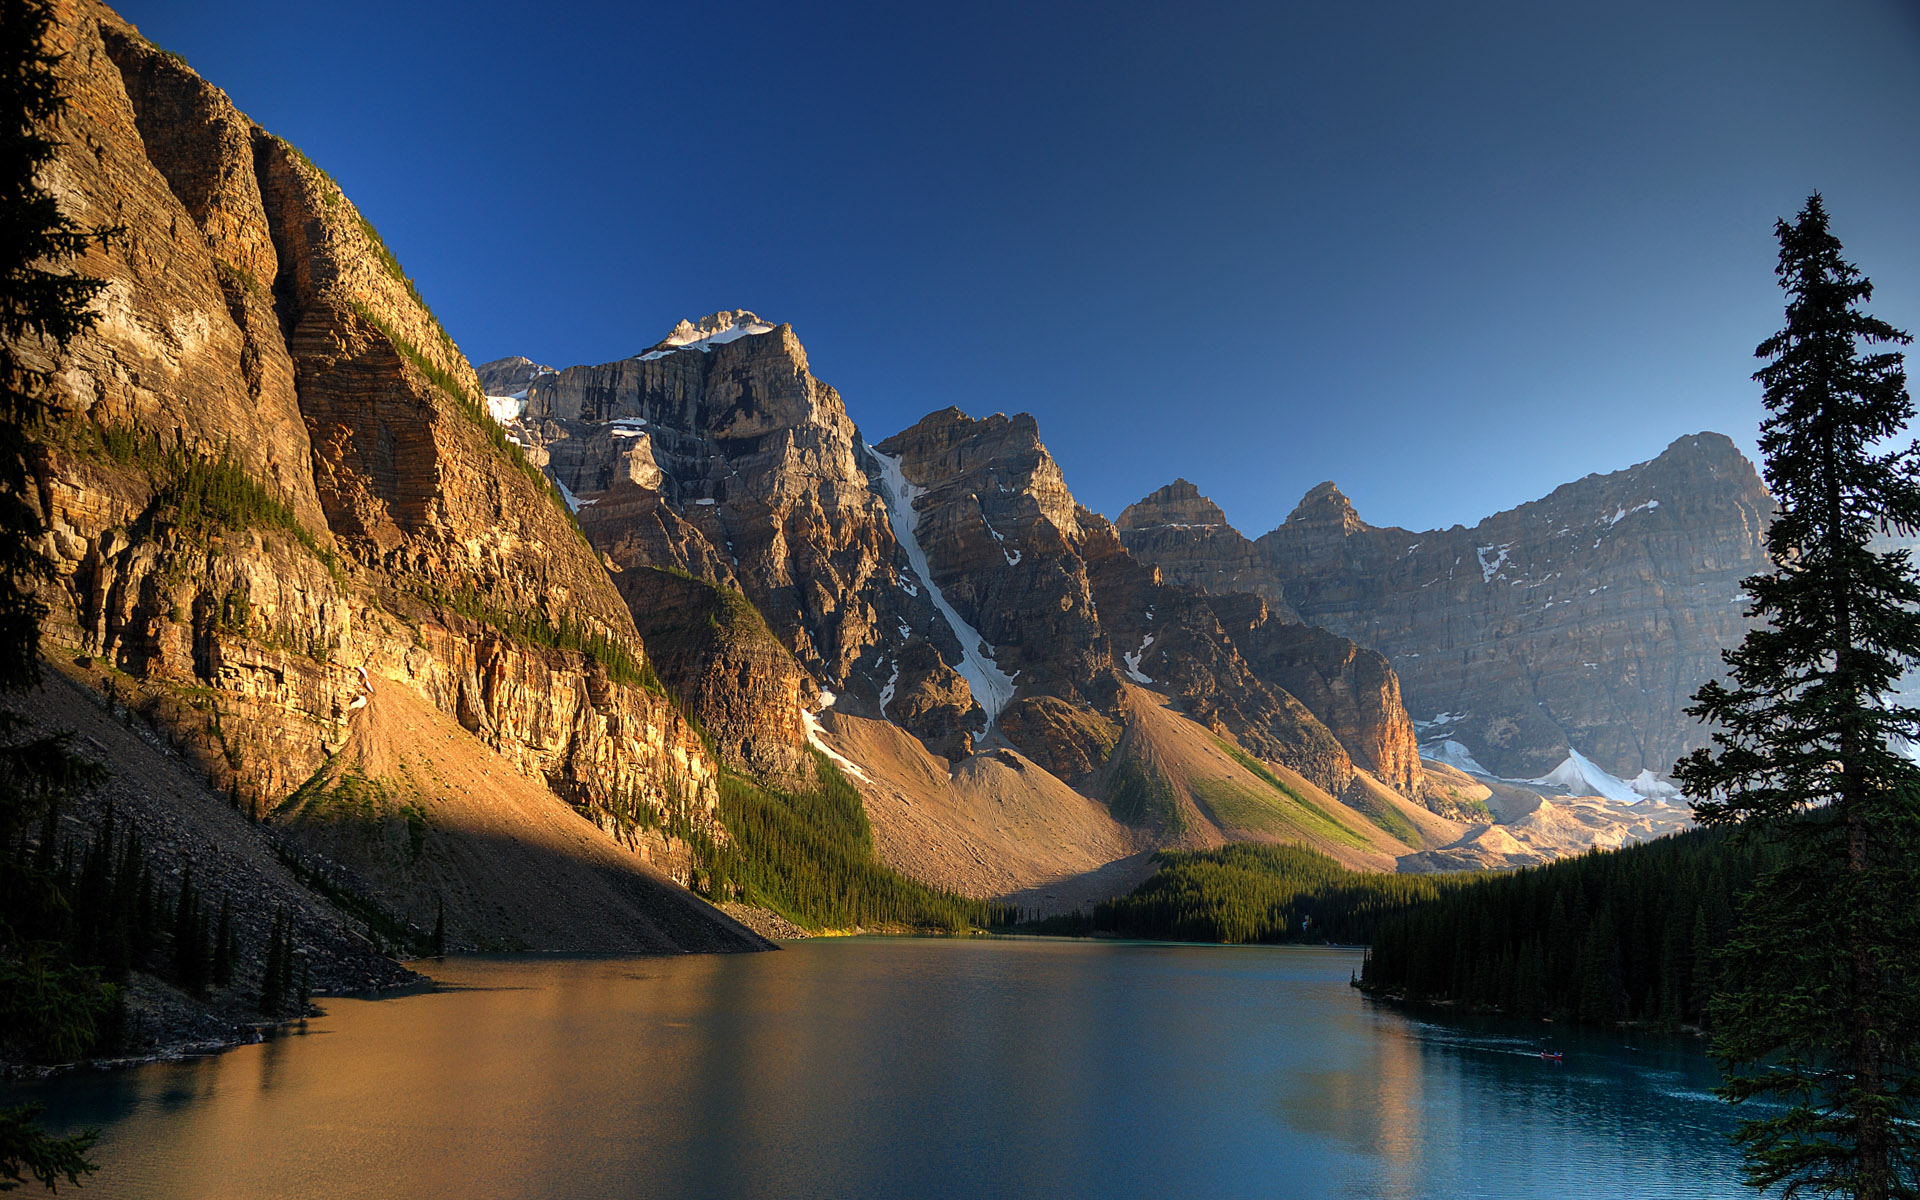 Landscape Canada Wallpapers